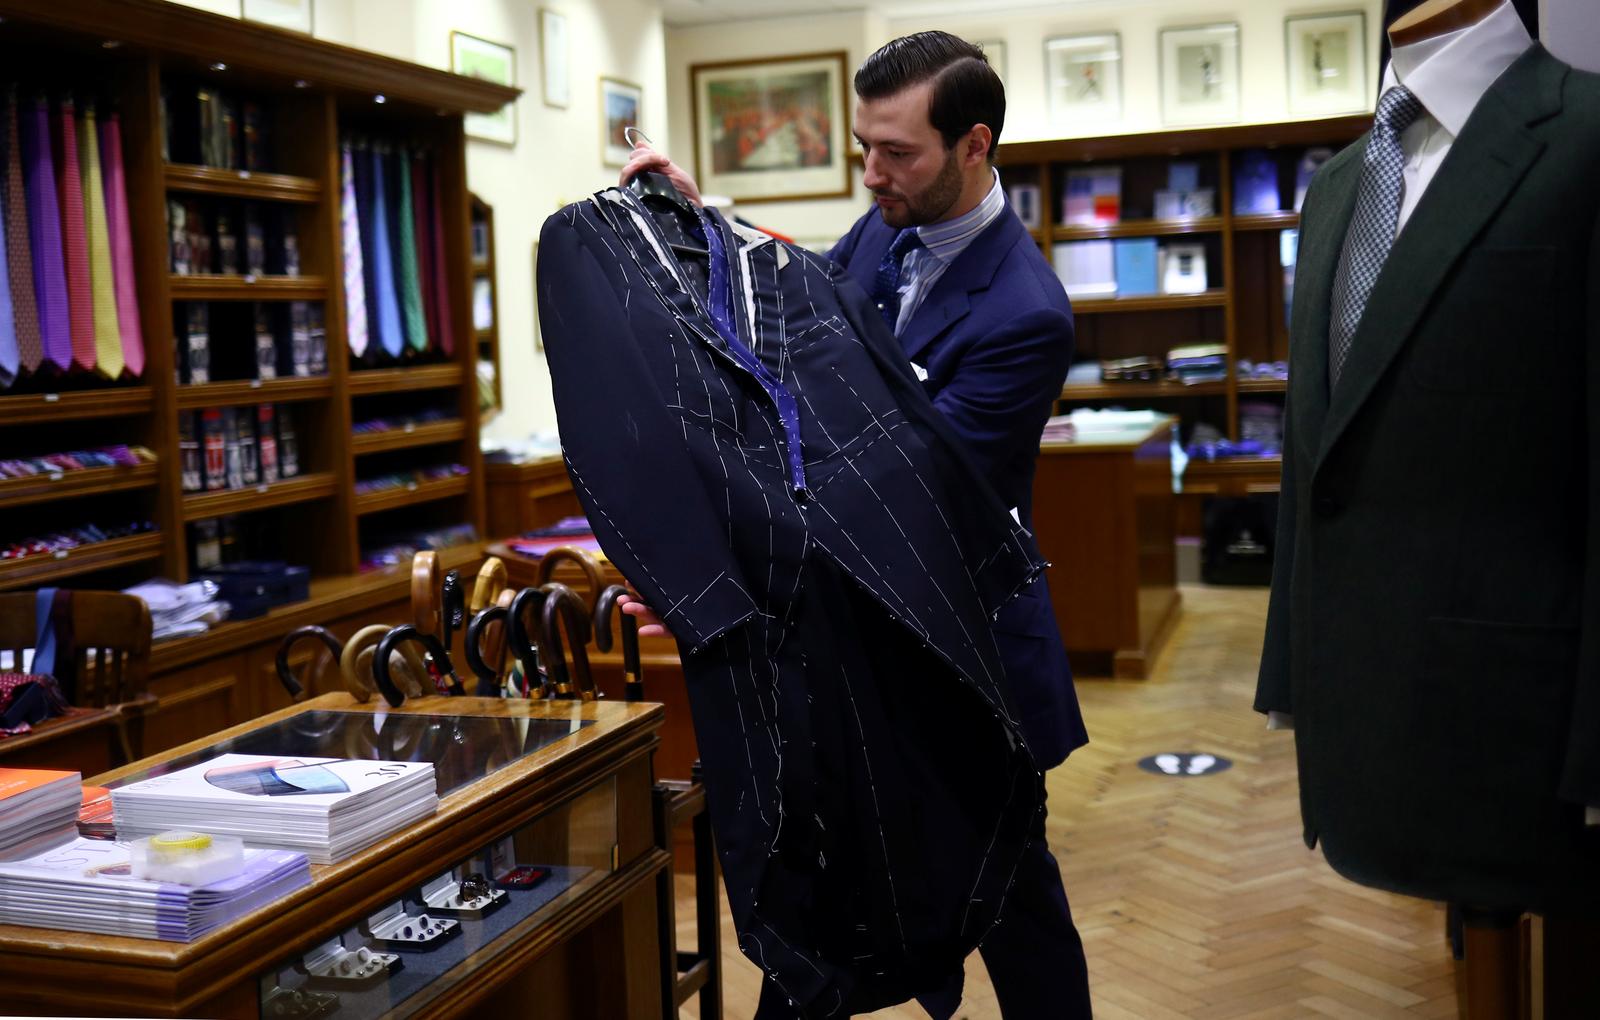 Unsuited to new era? Fate of formal fashion hangs by a thread